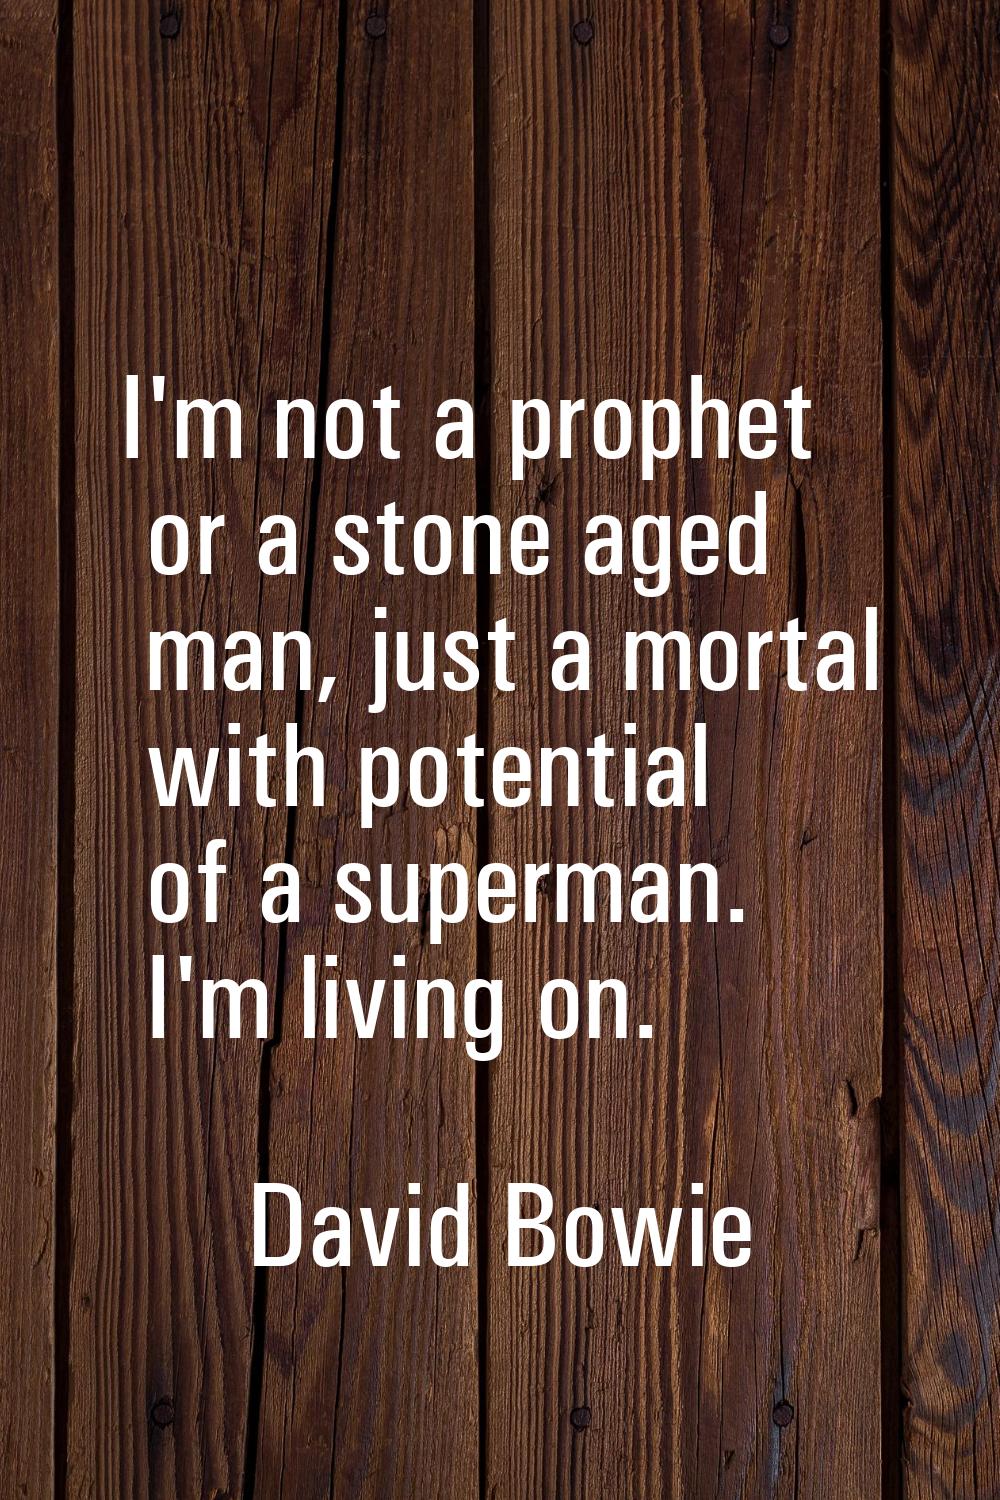 I'm not a prophet or a stone aged man, just a mortal with potential of a superman. I'm living on.